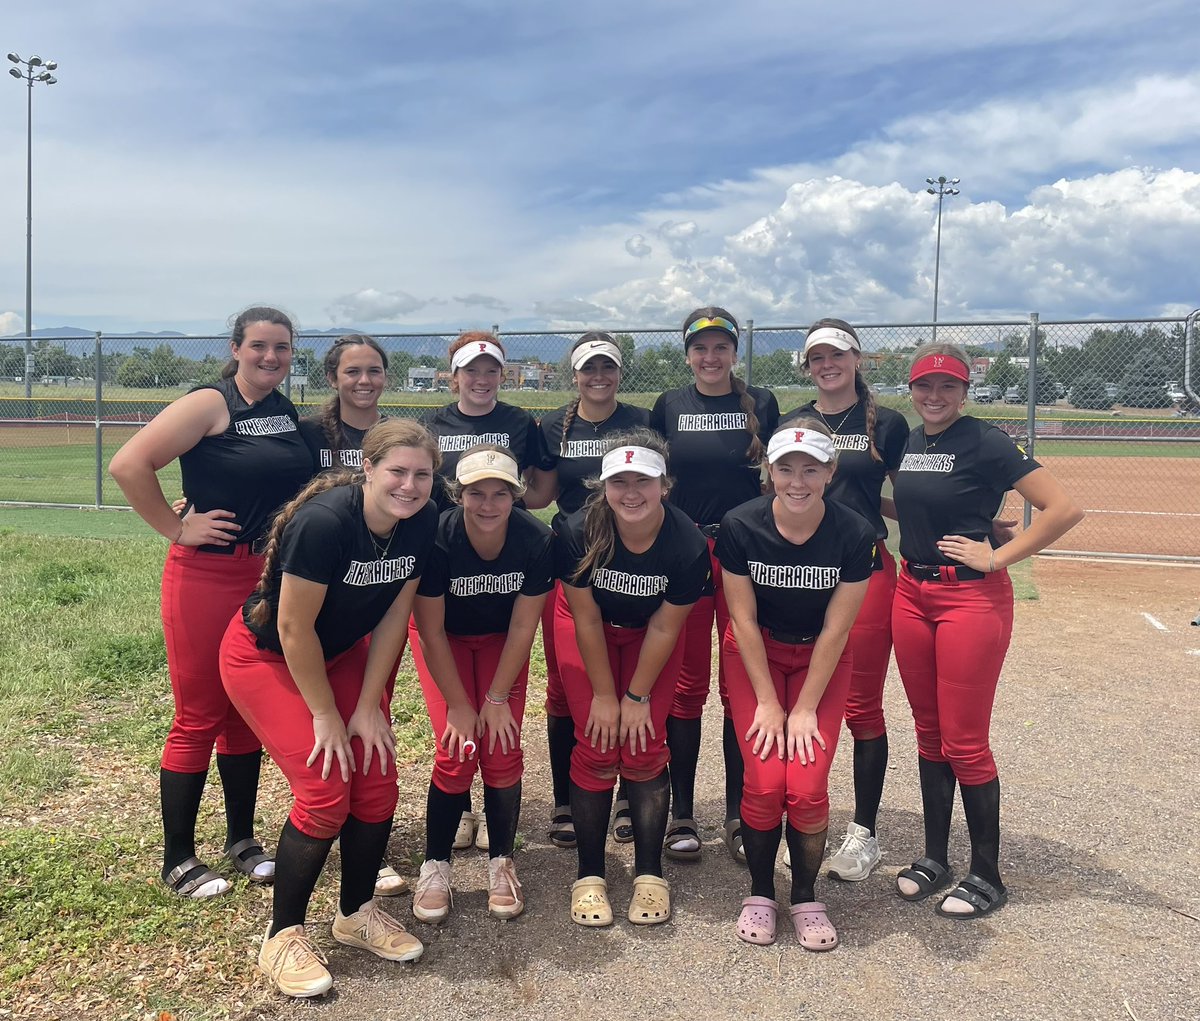 Team ready to start bracket play today! First game at 2:00 MST versus TX Glory CC, Louisville Sports Complex Field 4!! Coaches come take a look at this talented squad!! 🧨🥎